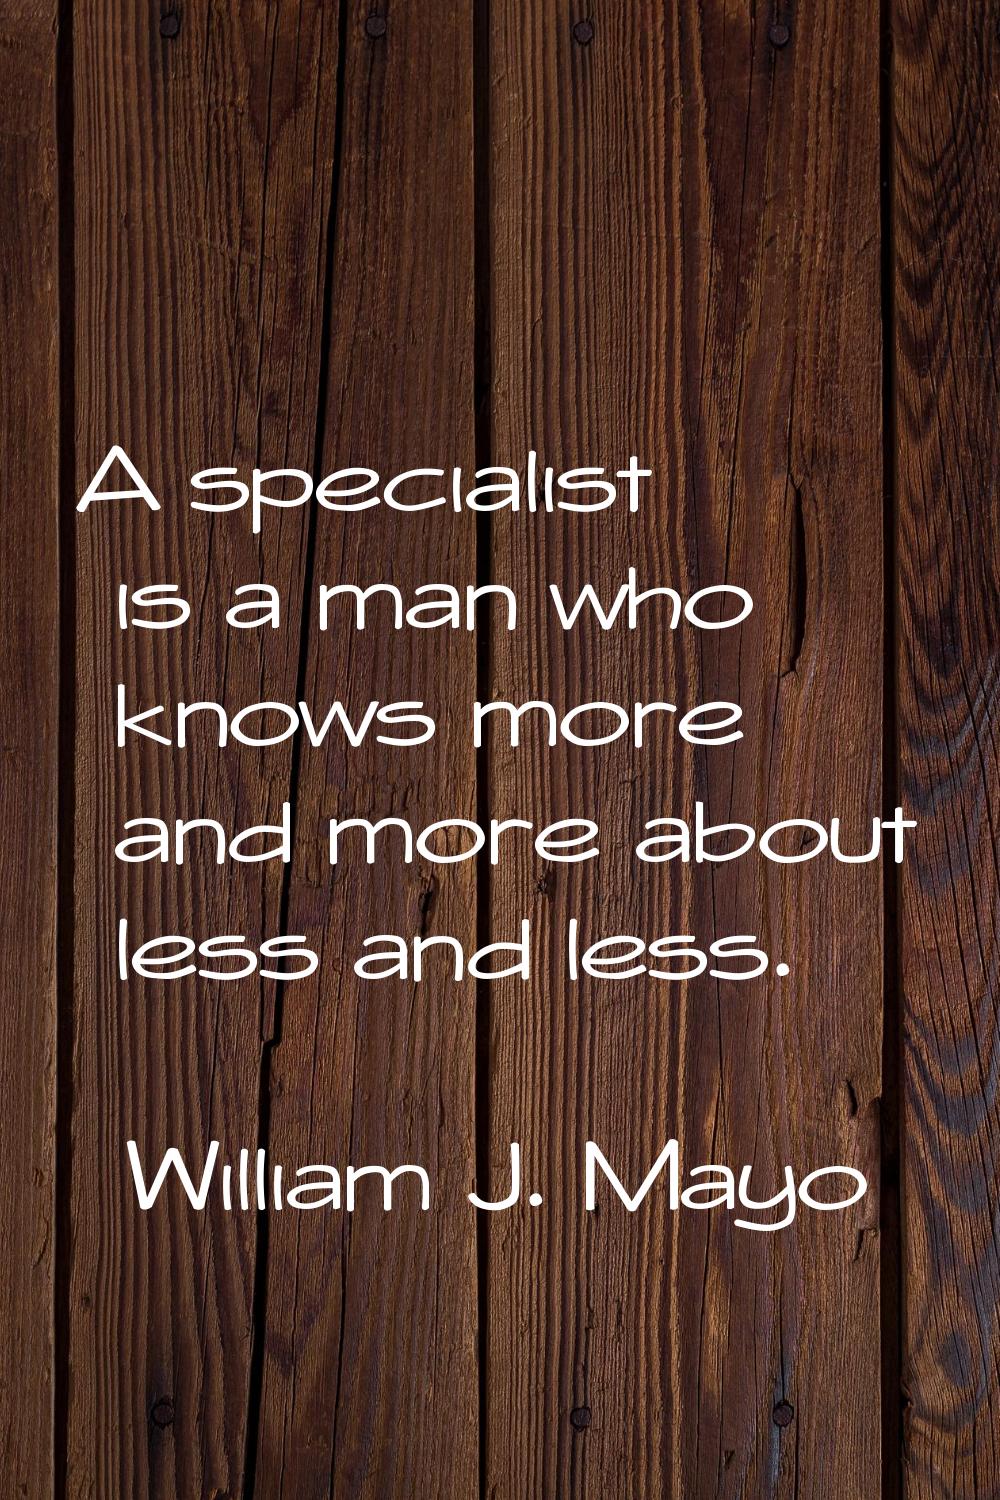 A specialist is a man who knows more and more about less and less.